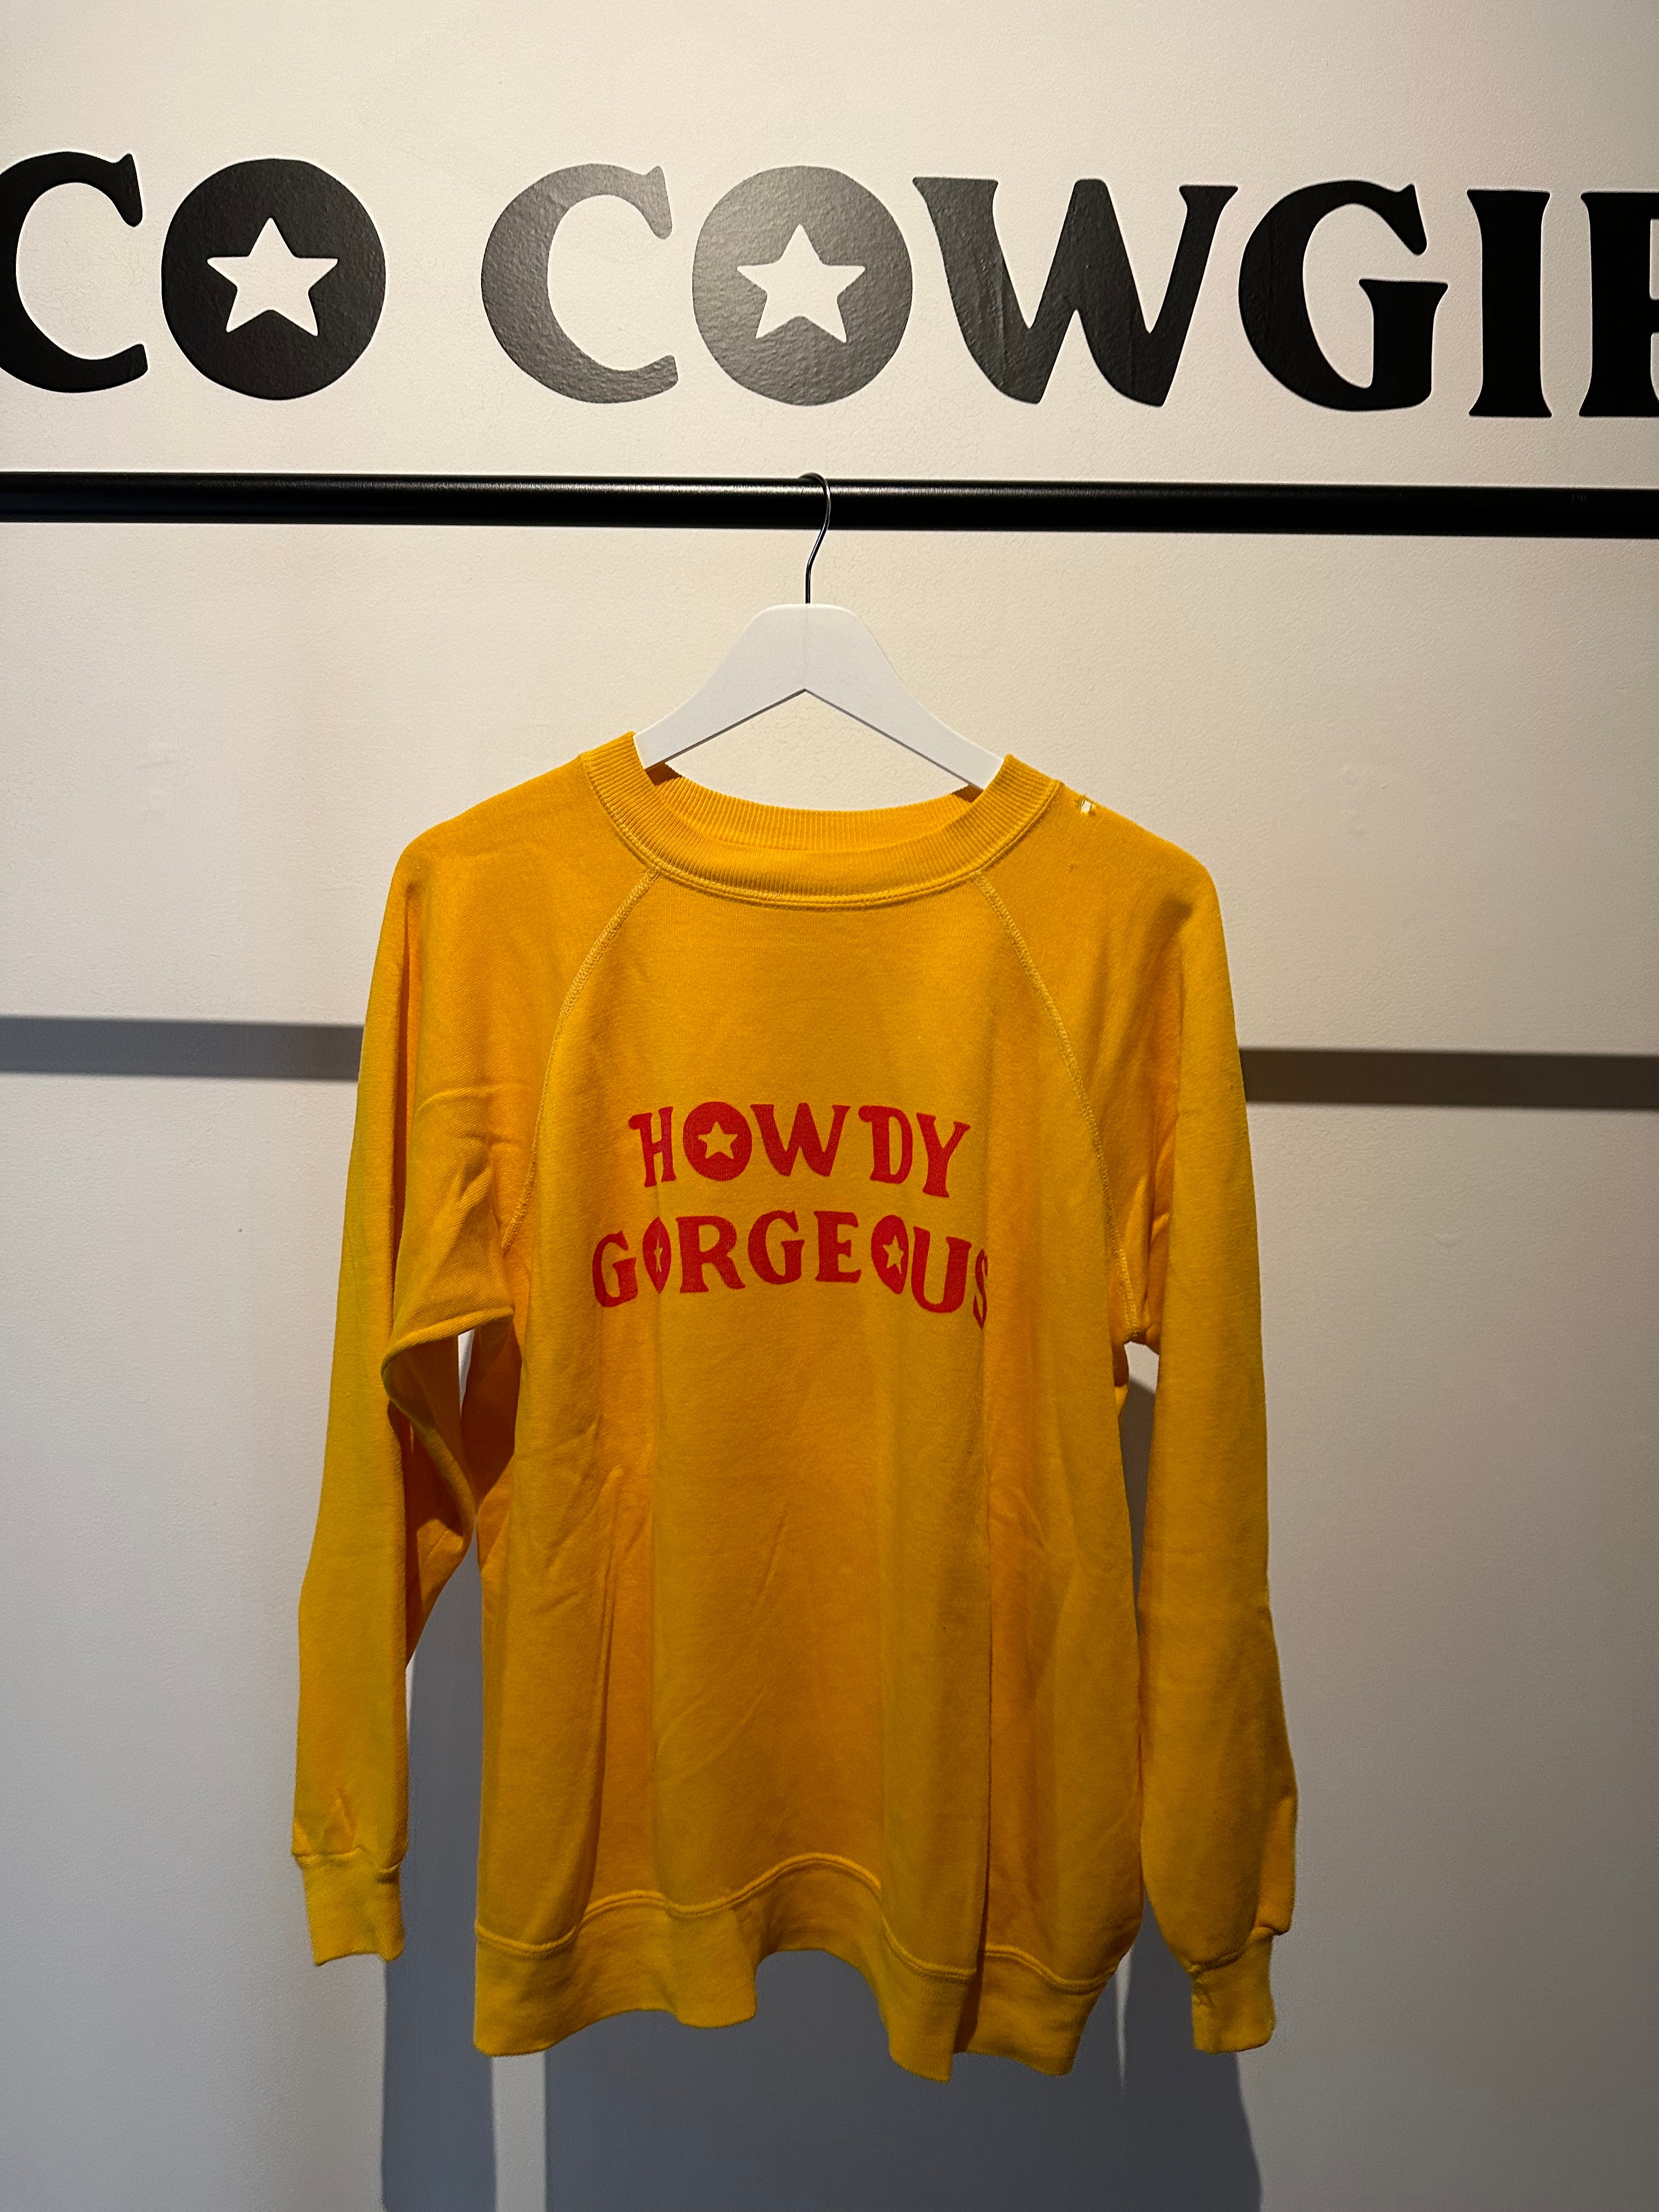 Vintage Howdy Gorgeous Pullover- red on yellow